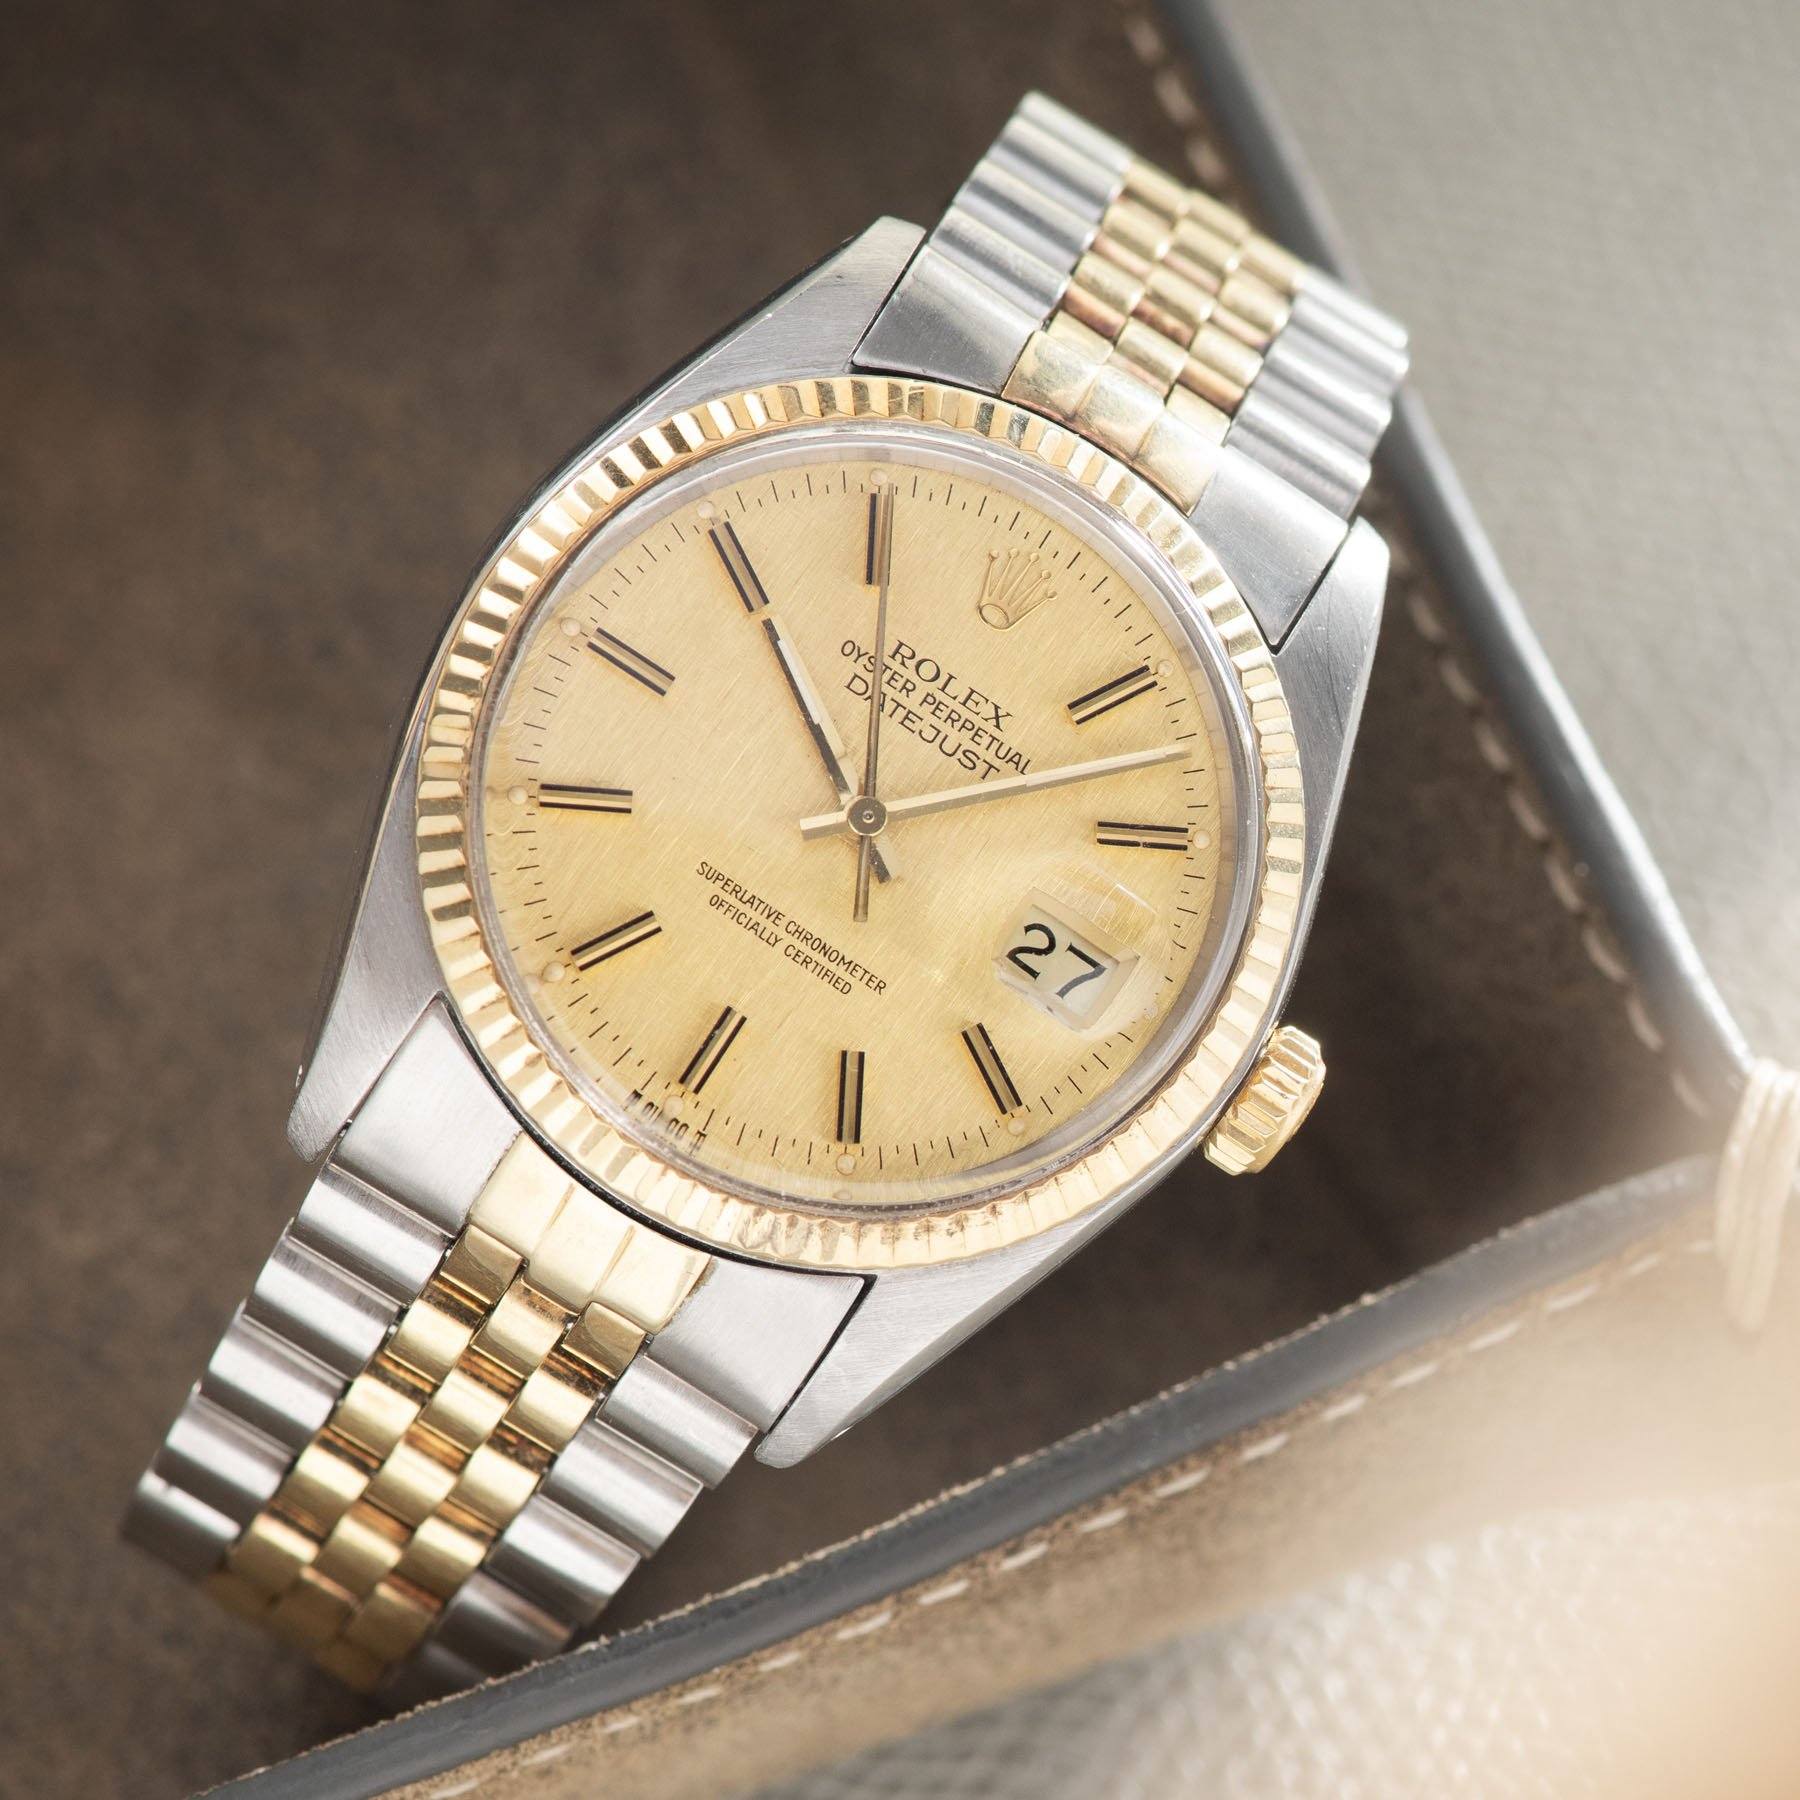 Rolex Datejust Steel and Gold 16013 Linen Dial